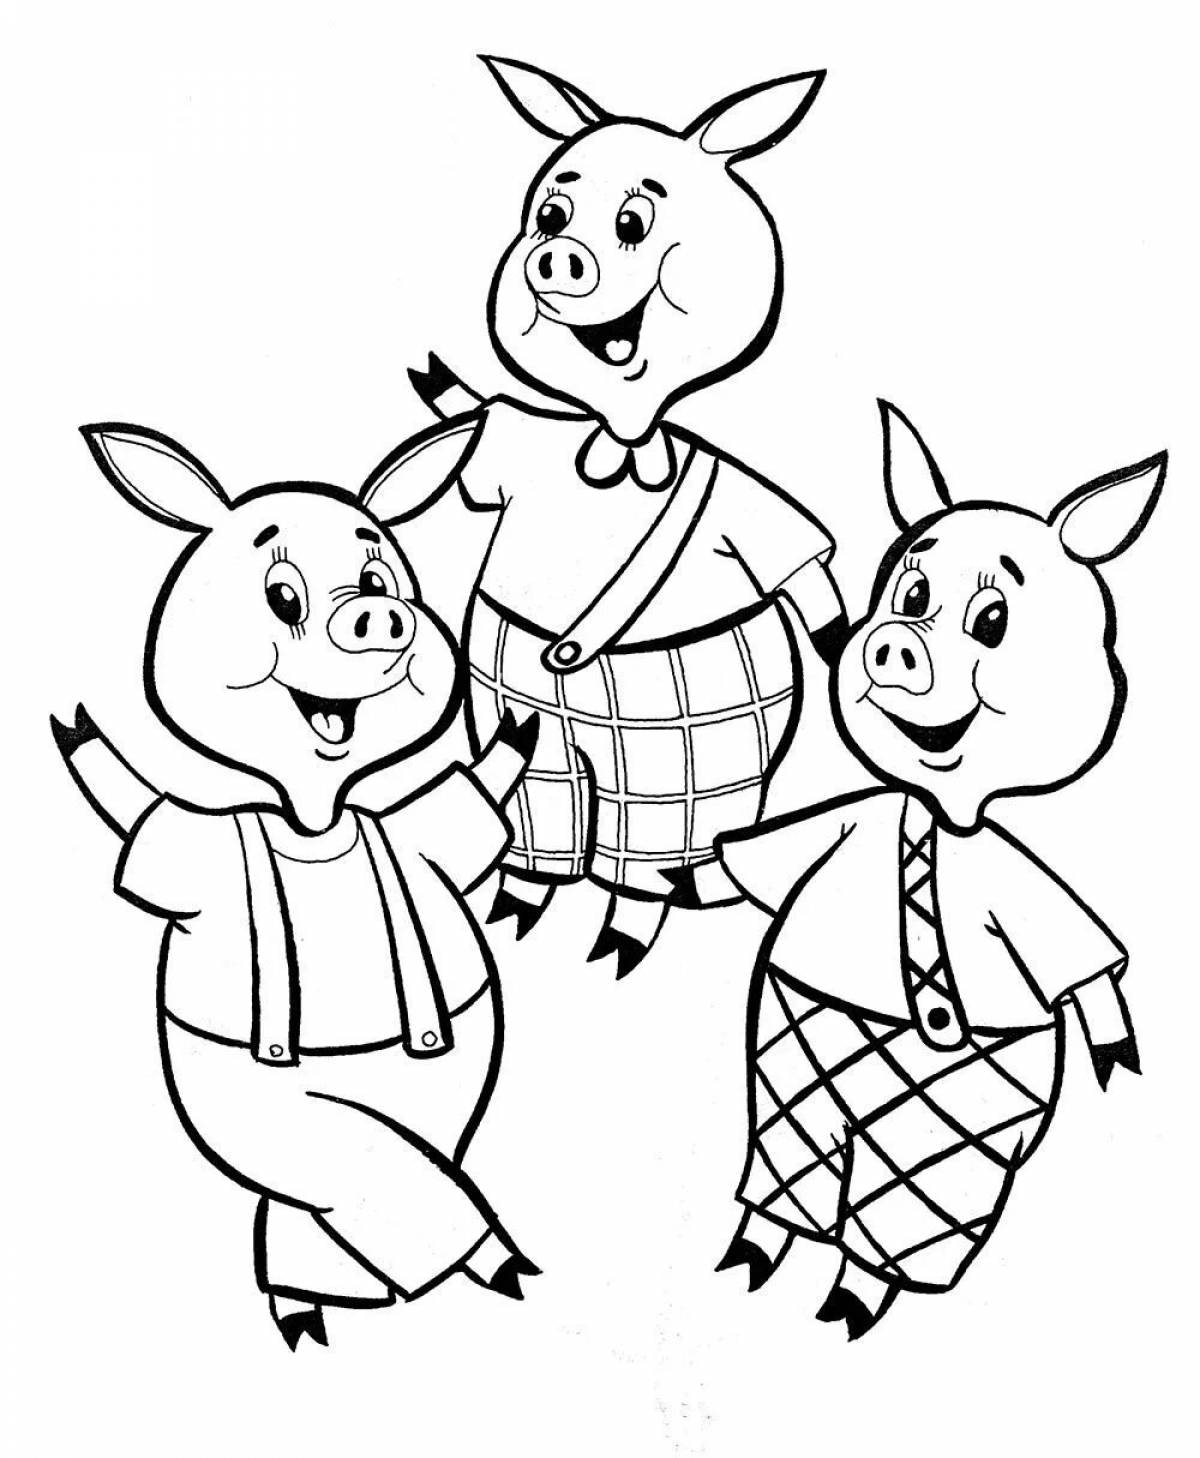 Fun coloring 3 pigs for babies